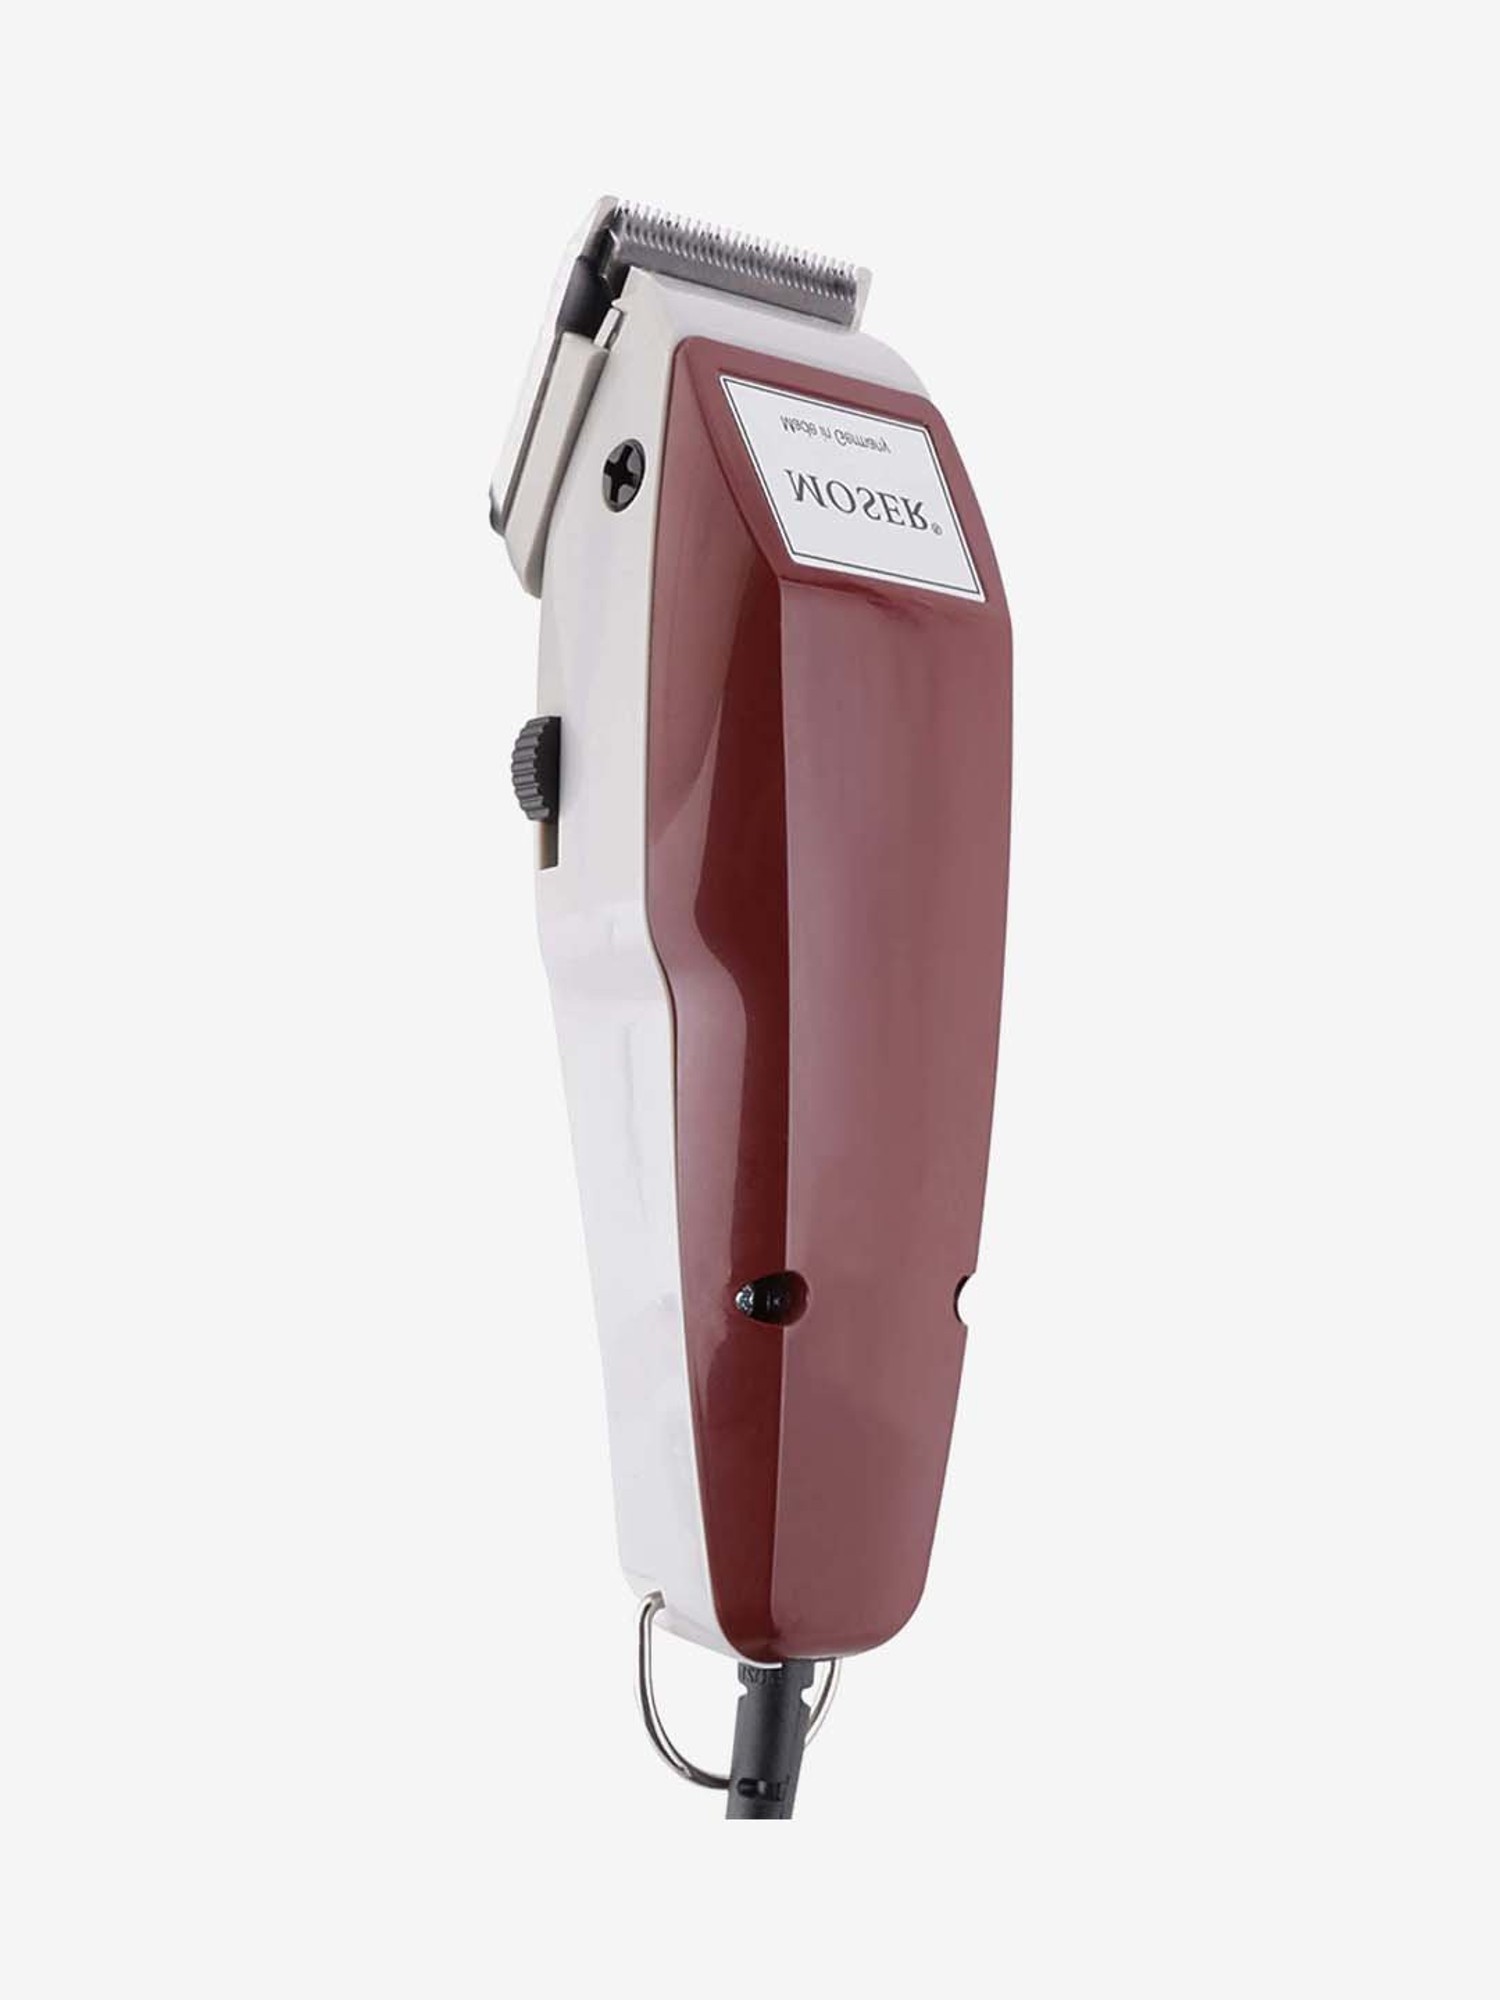 Buy Moser 1400-0050 Corded Classic Professional Clipper Online At Best  Price @ Tata CLiQ